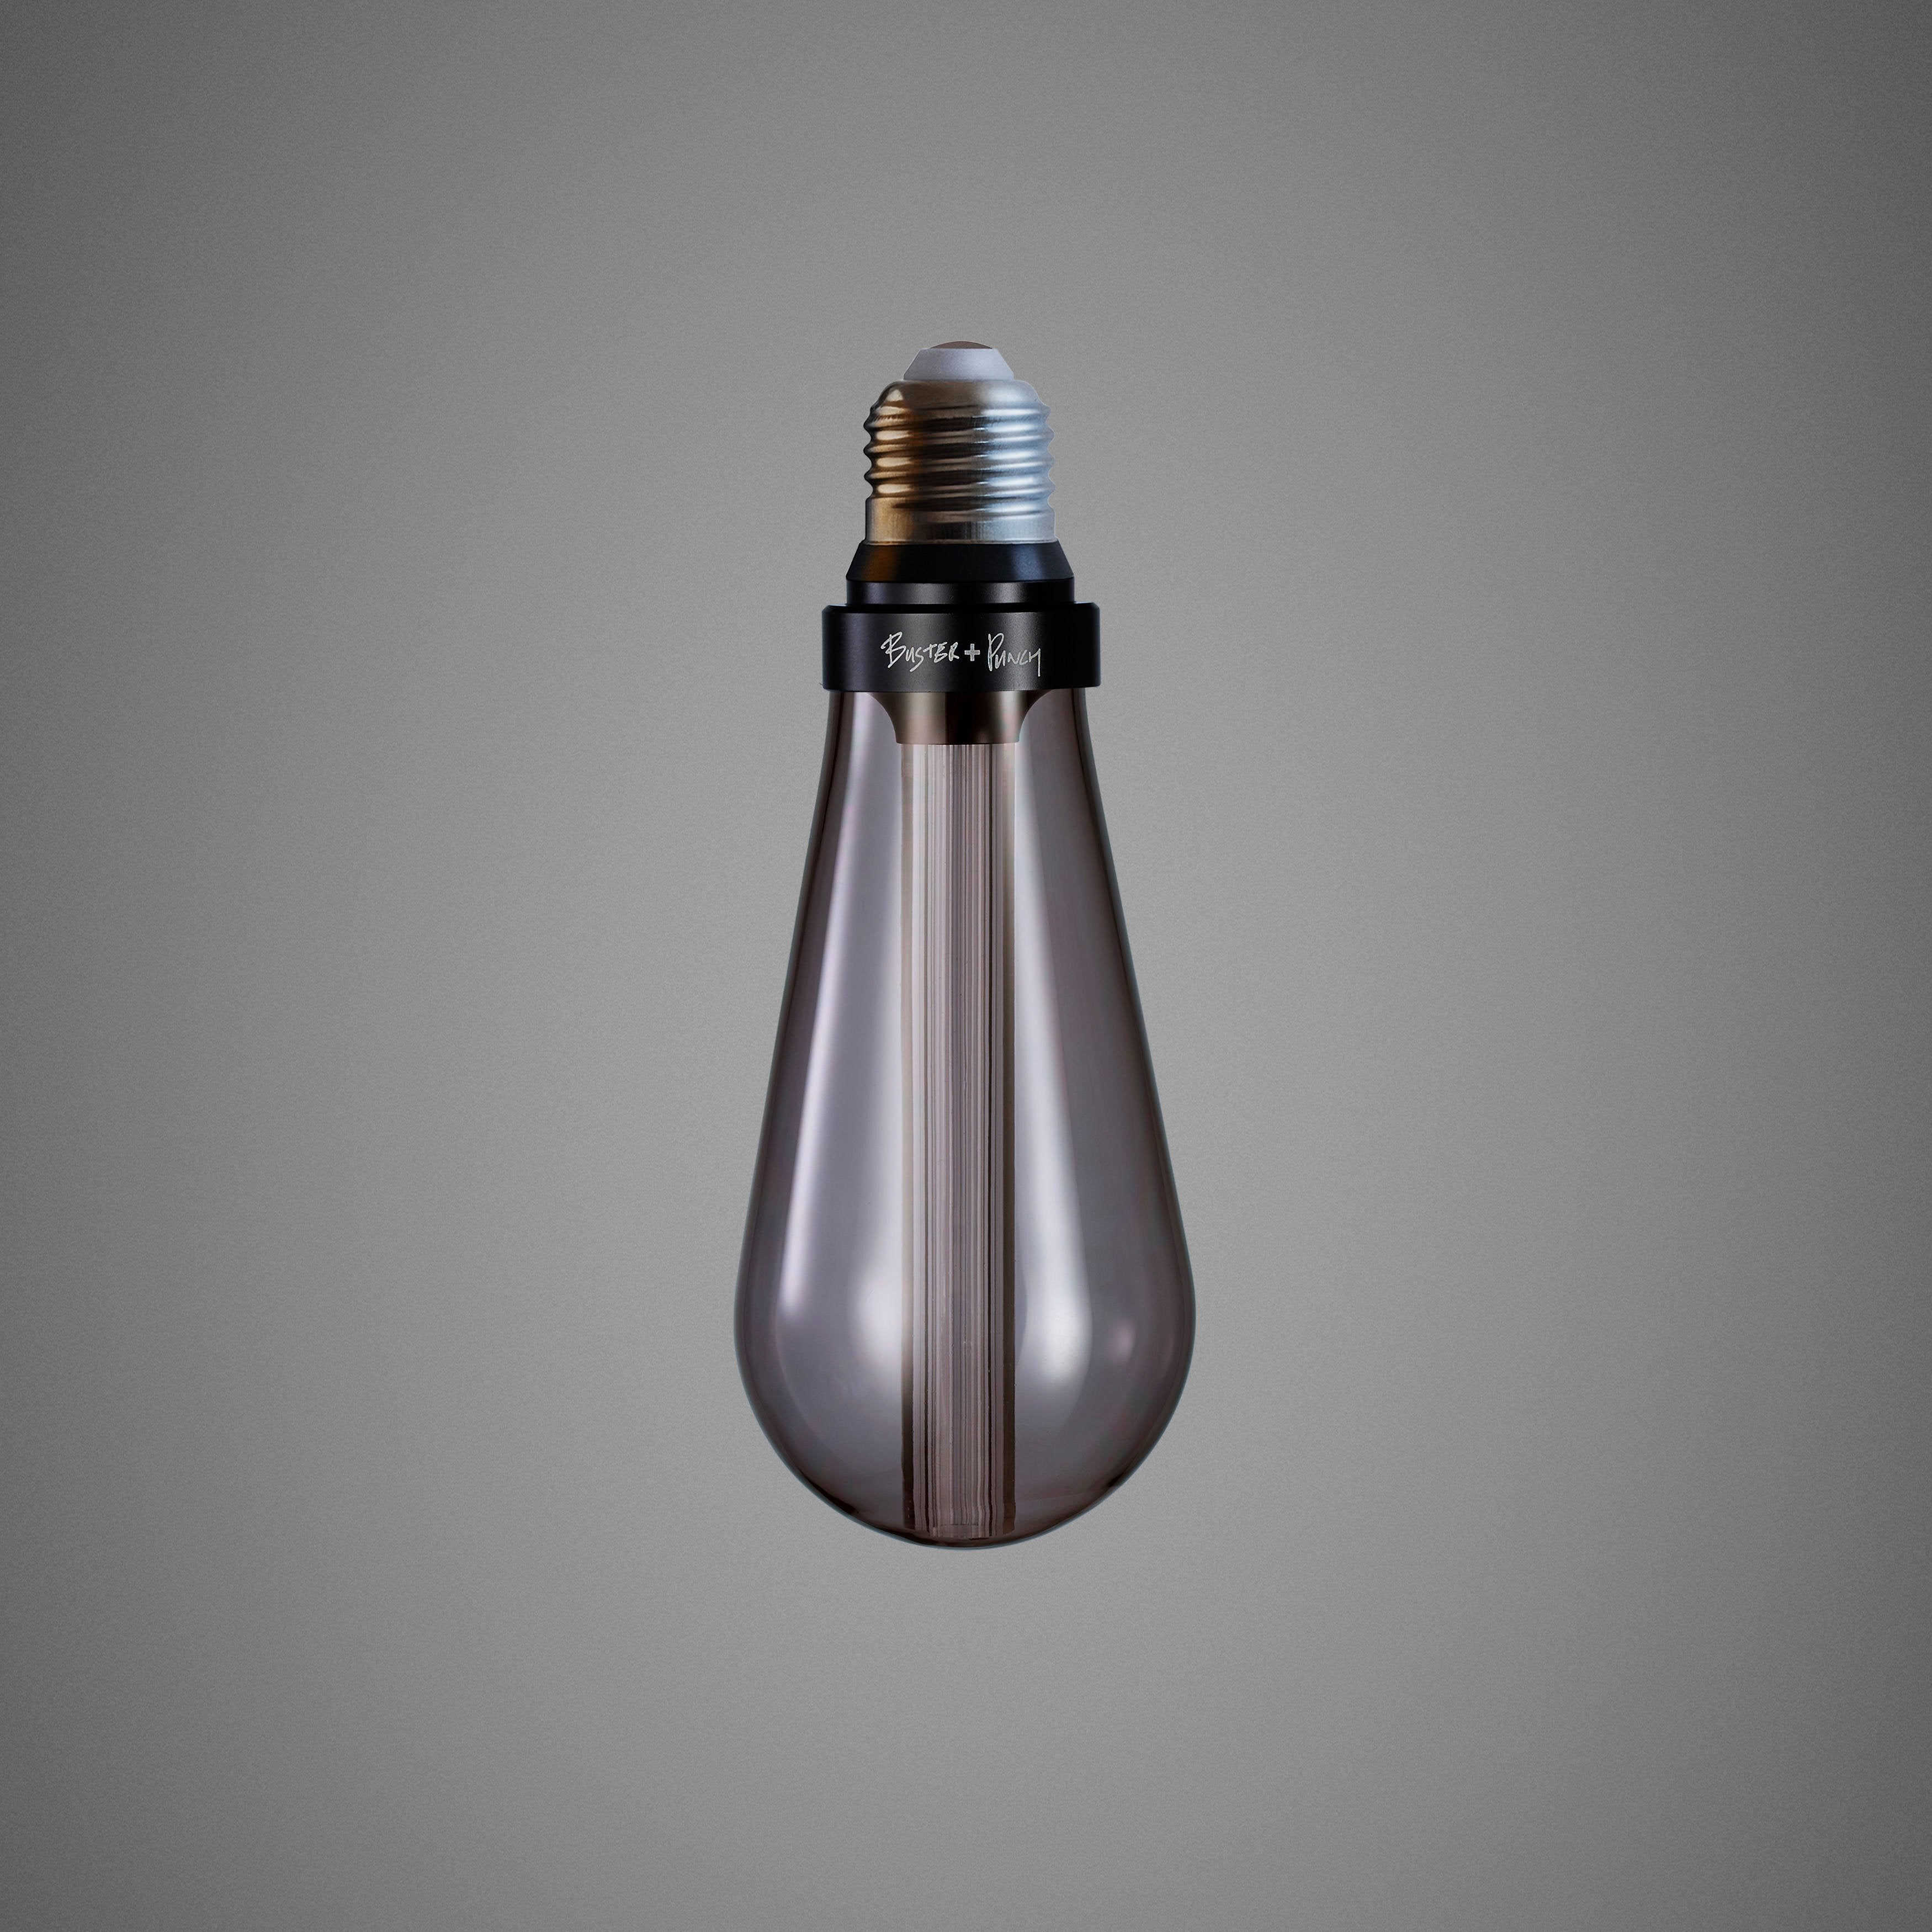 BUSTER BULB / SMOKED - NON DIMMABLE - E27